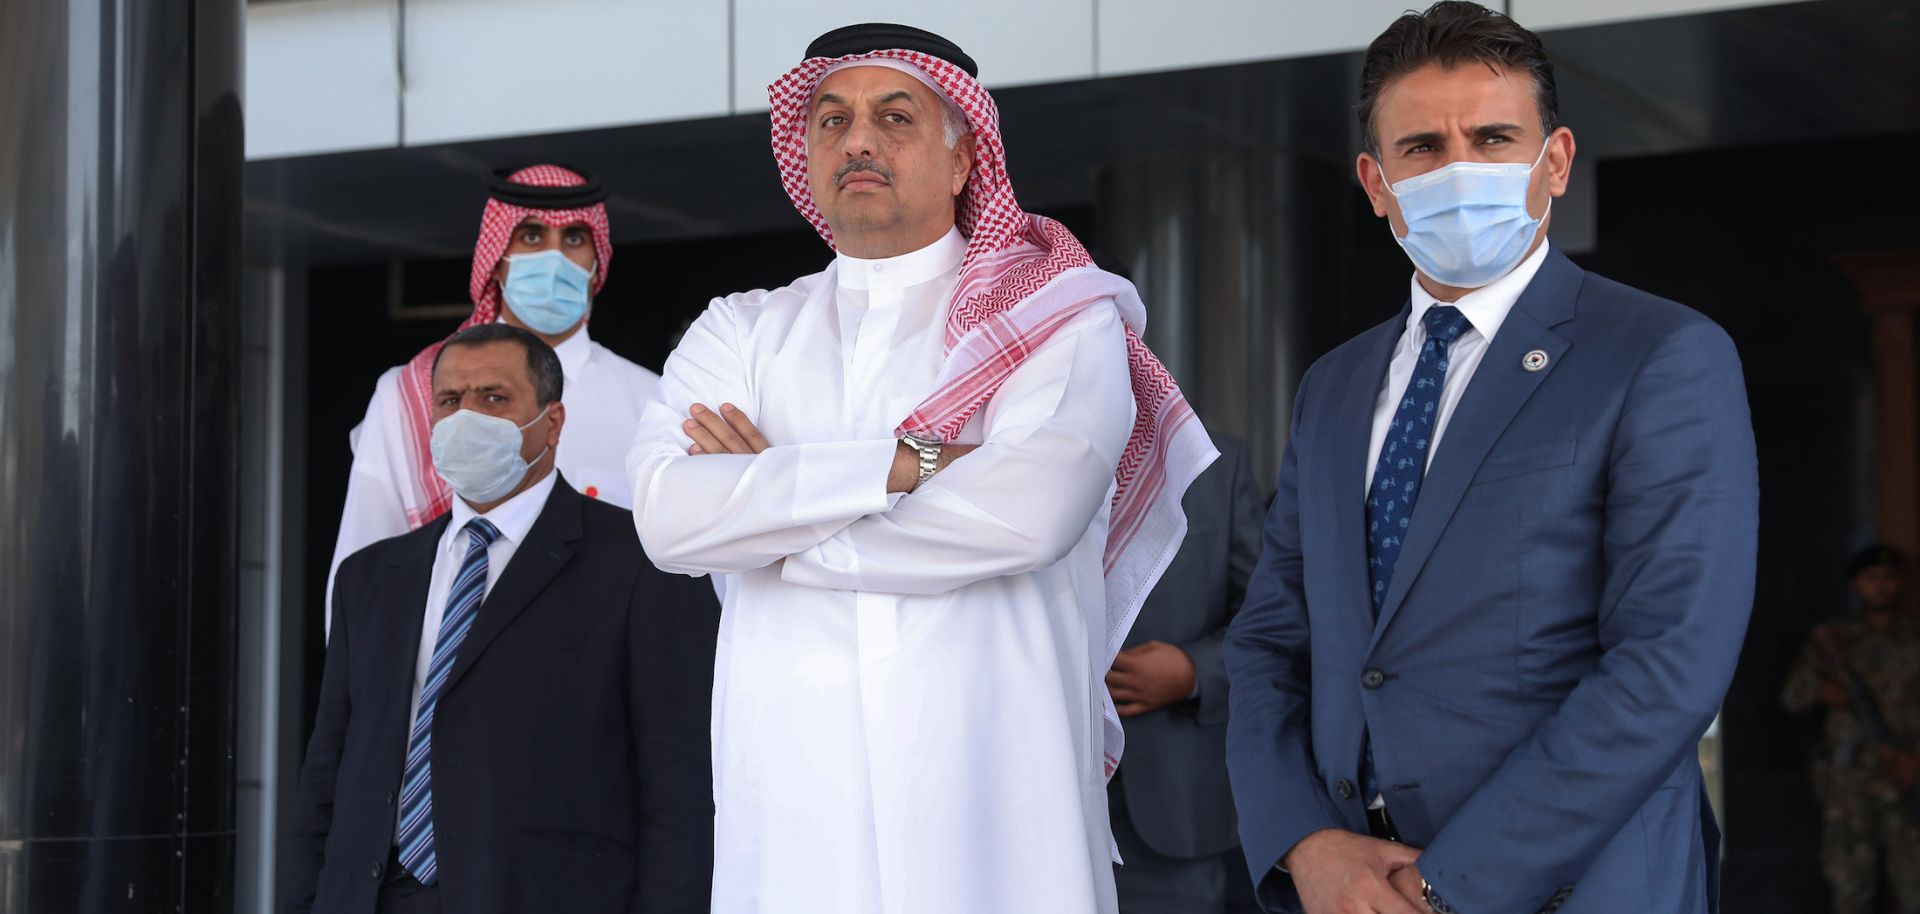 Qatar’s defense minister (center) waits for the arrival of his Turkish counterpart to meet with the prime minister of Libya’s U.N.-recognised Government of National Accord (GNA) in Tripoli on Aug. 17, 2020. 